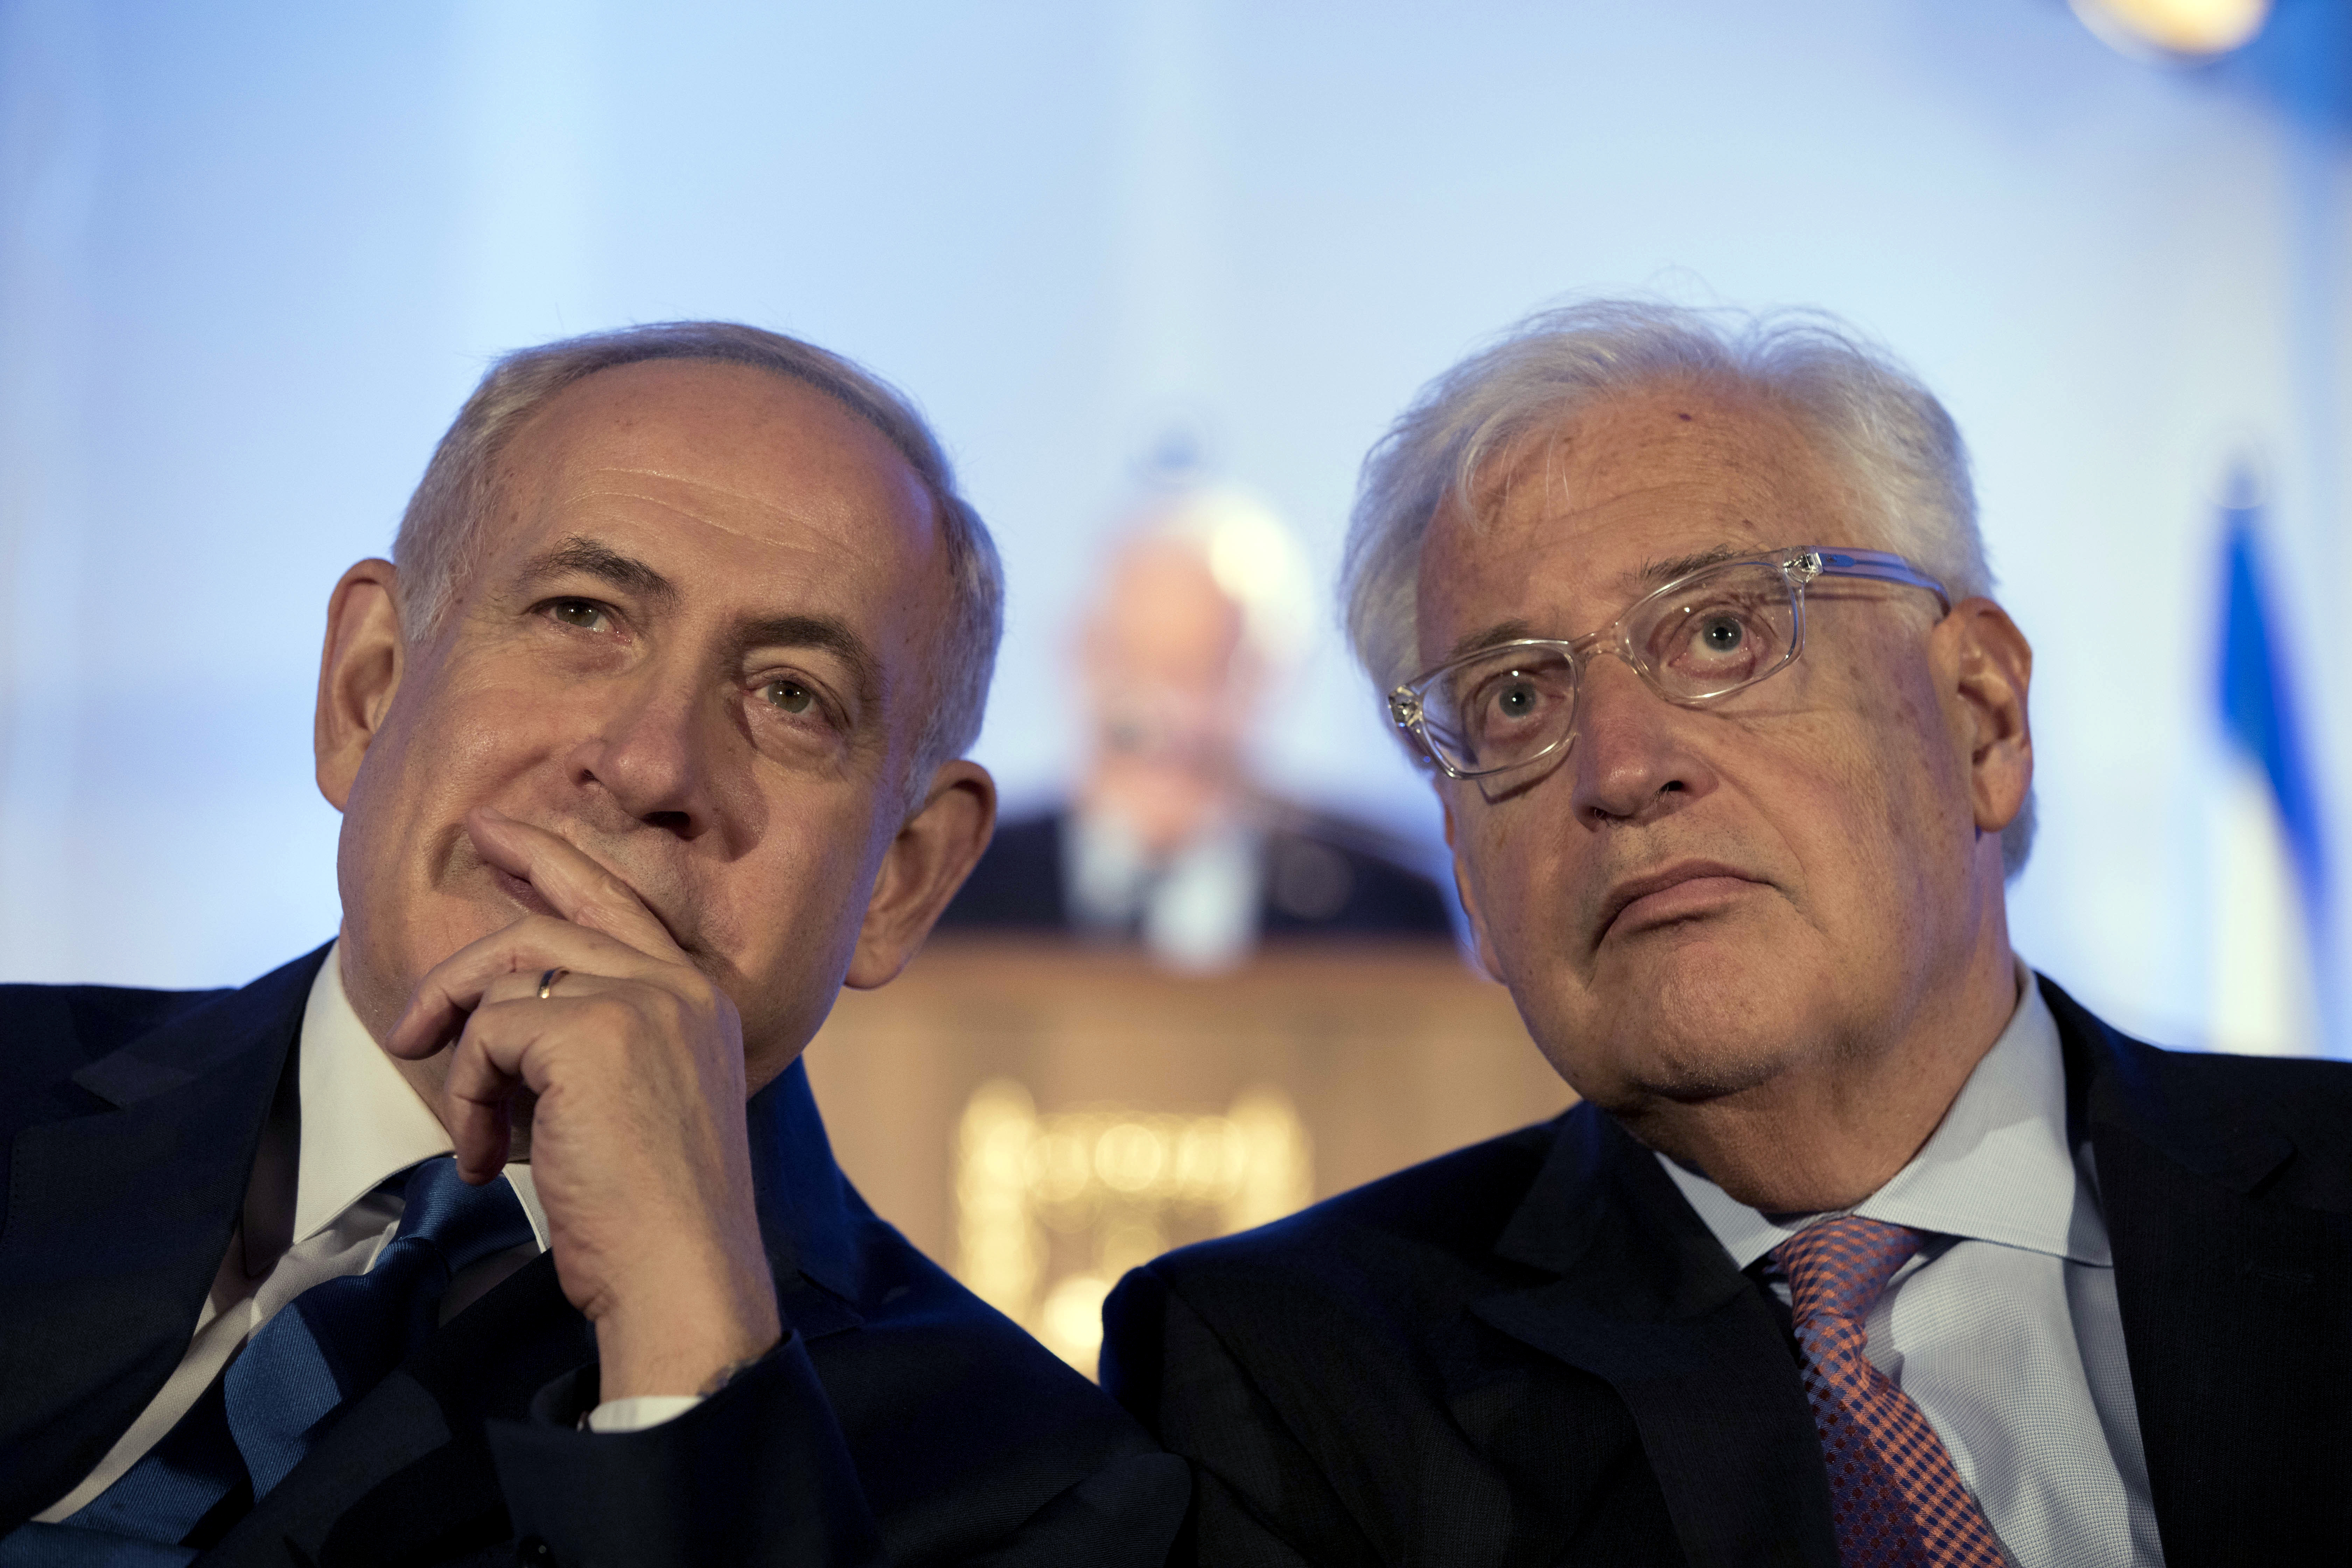 FILE - In this May 21, 2017, file photo, Israeli Prime Minister Benjamin Netanyahu, left and David Friedman, right, the new United States Ambassador to Israel attend a ceremony celebrating the 50th anniversary of the liberation and unification of Jerusalem, in front of the walls of the Old City of Jerusalem. AP sources say President Donald Trump is considering giving Friedman more authority over the U.S. outpost that handles Palestinian affairs, a shift likely to further dampen Palestinian hopes for an independent state. (Abir Sultan/Pool Photo via AP, File)